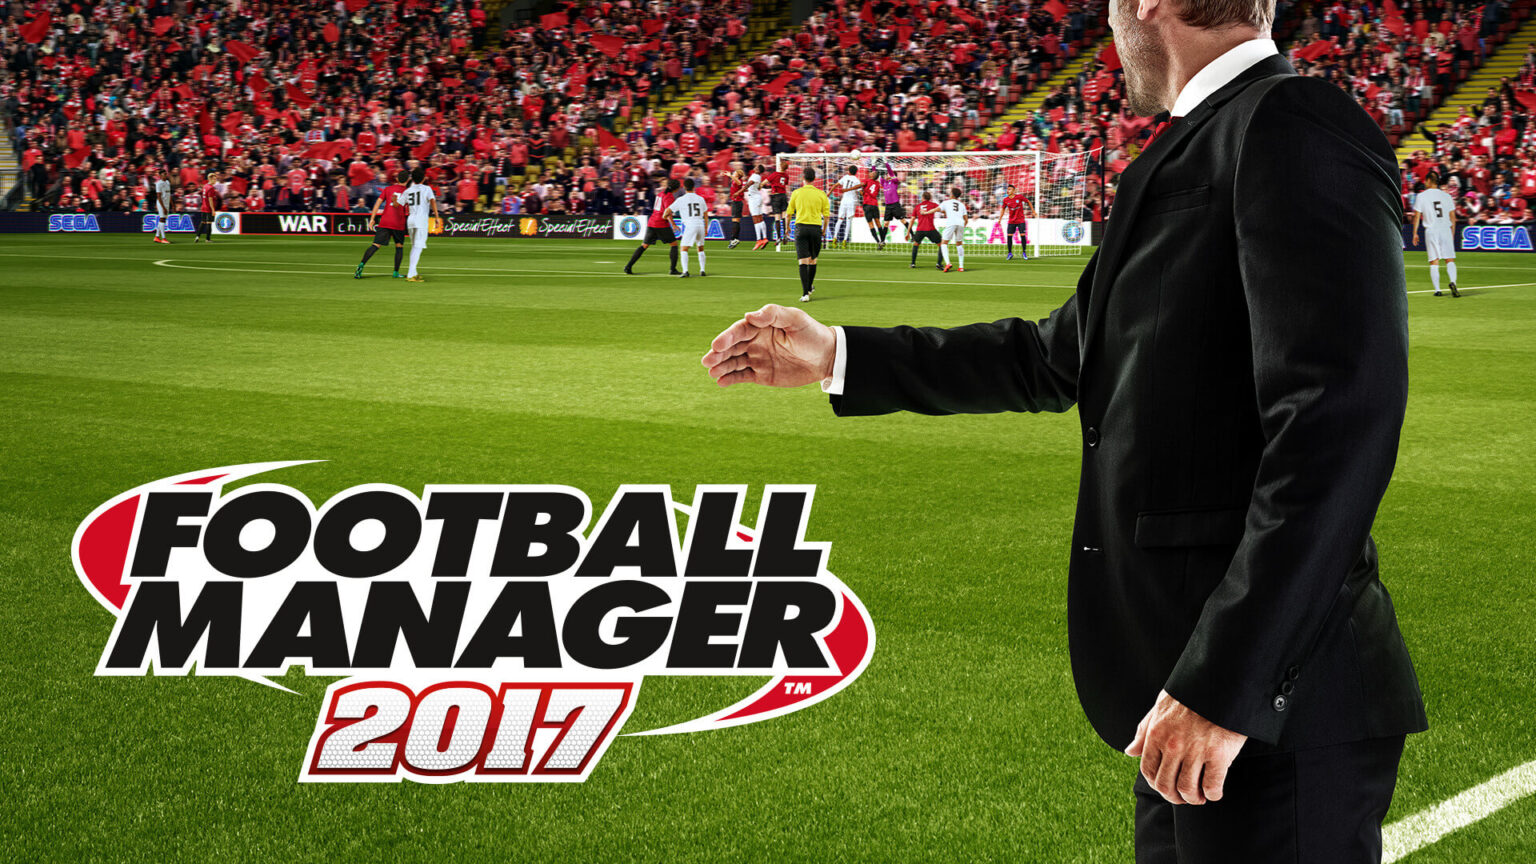 Football manager 2017 pc download torrent